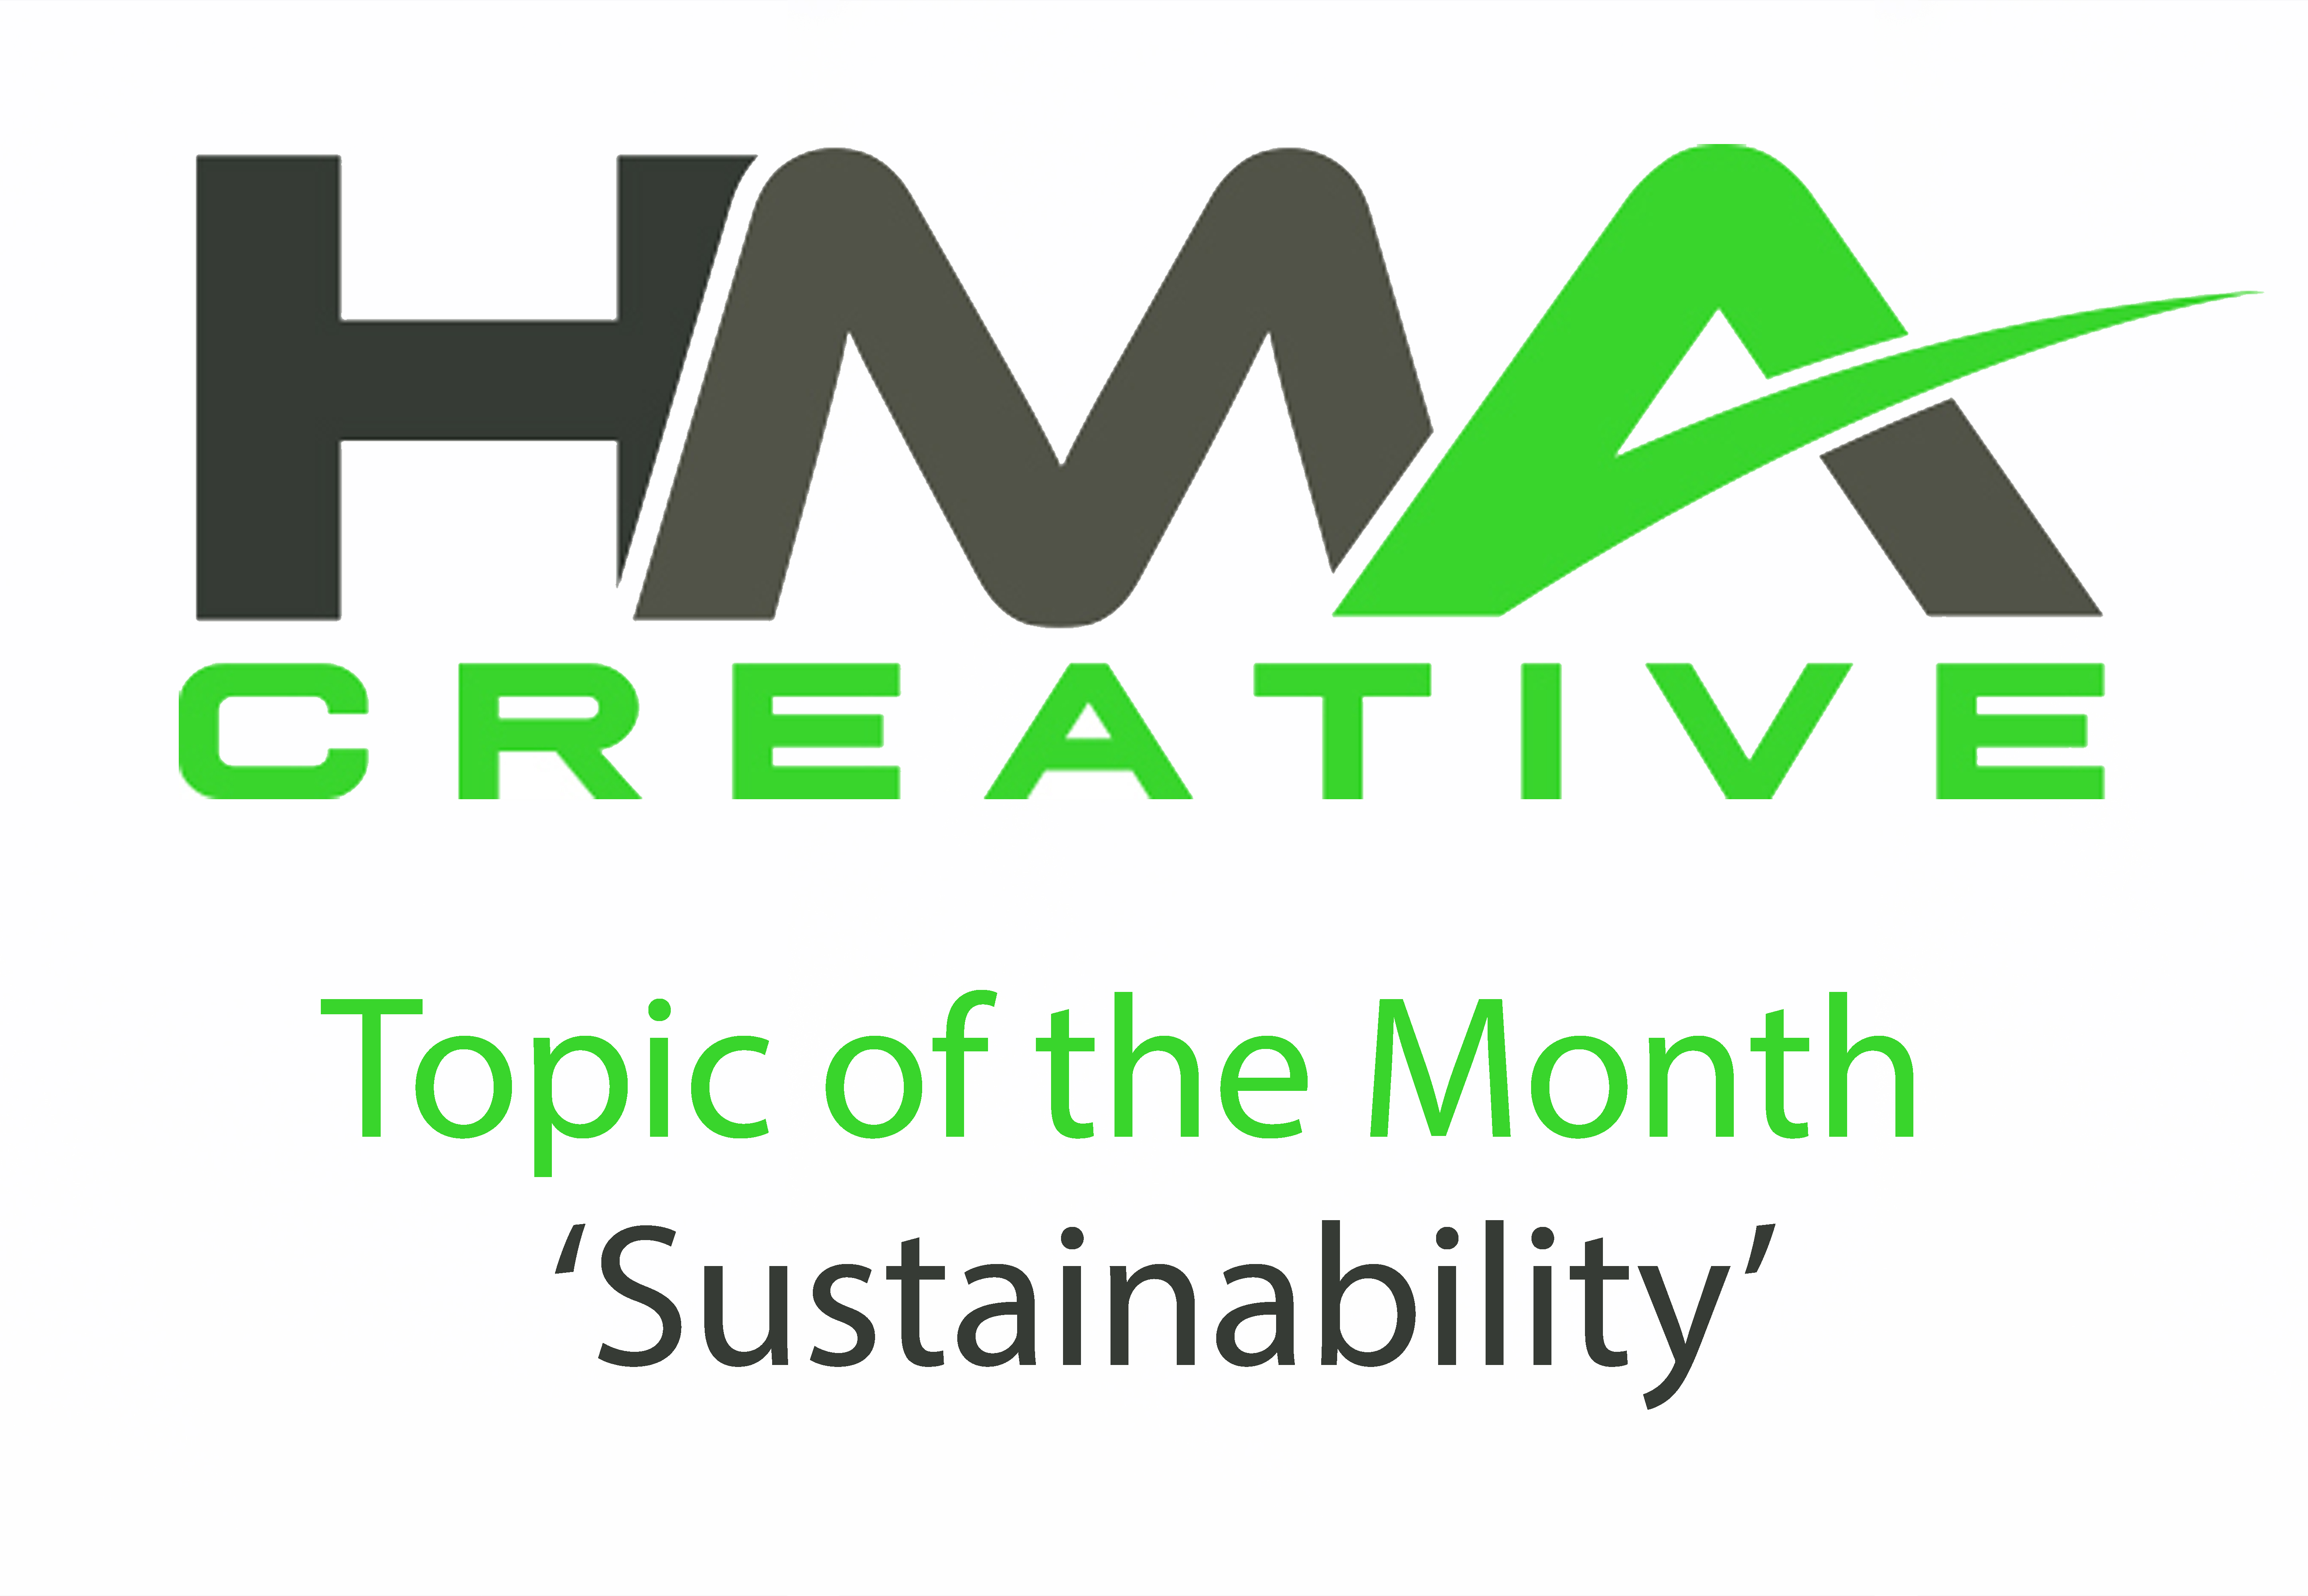 Topic of the Month – Sustainability